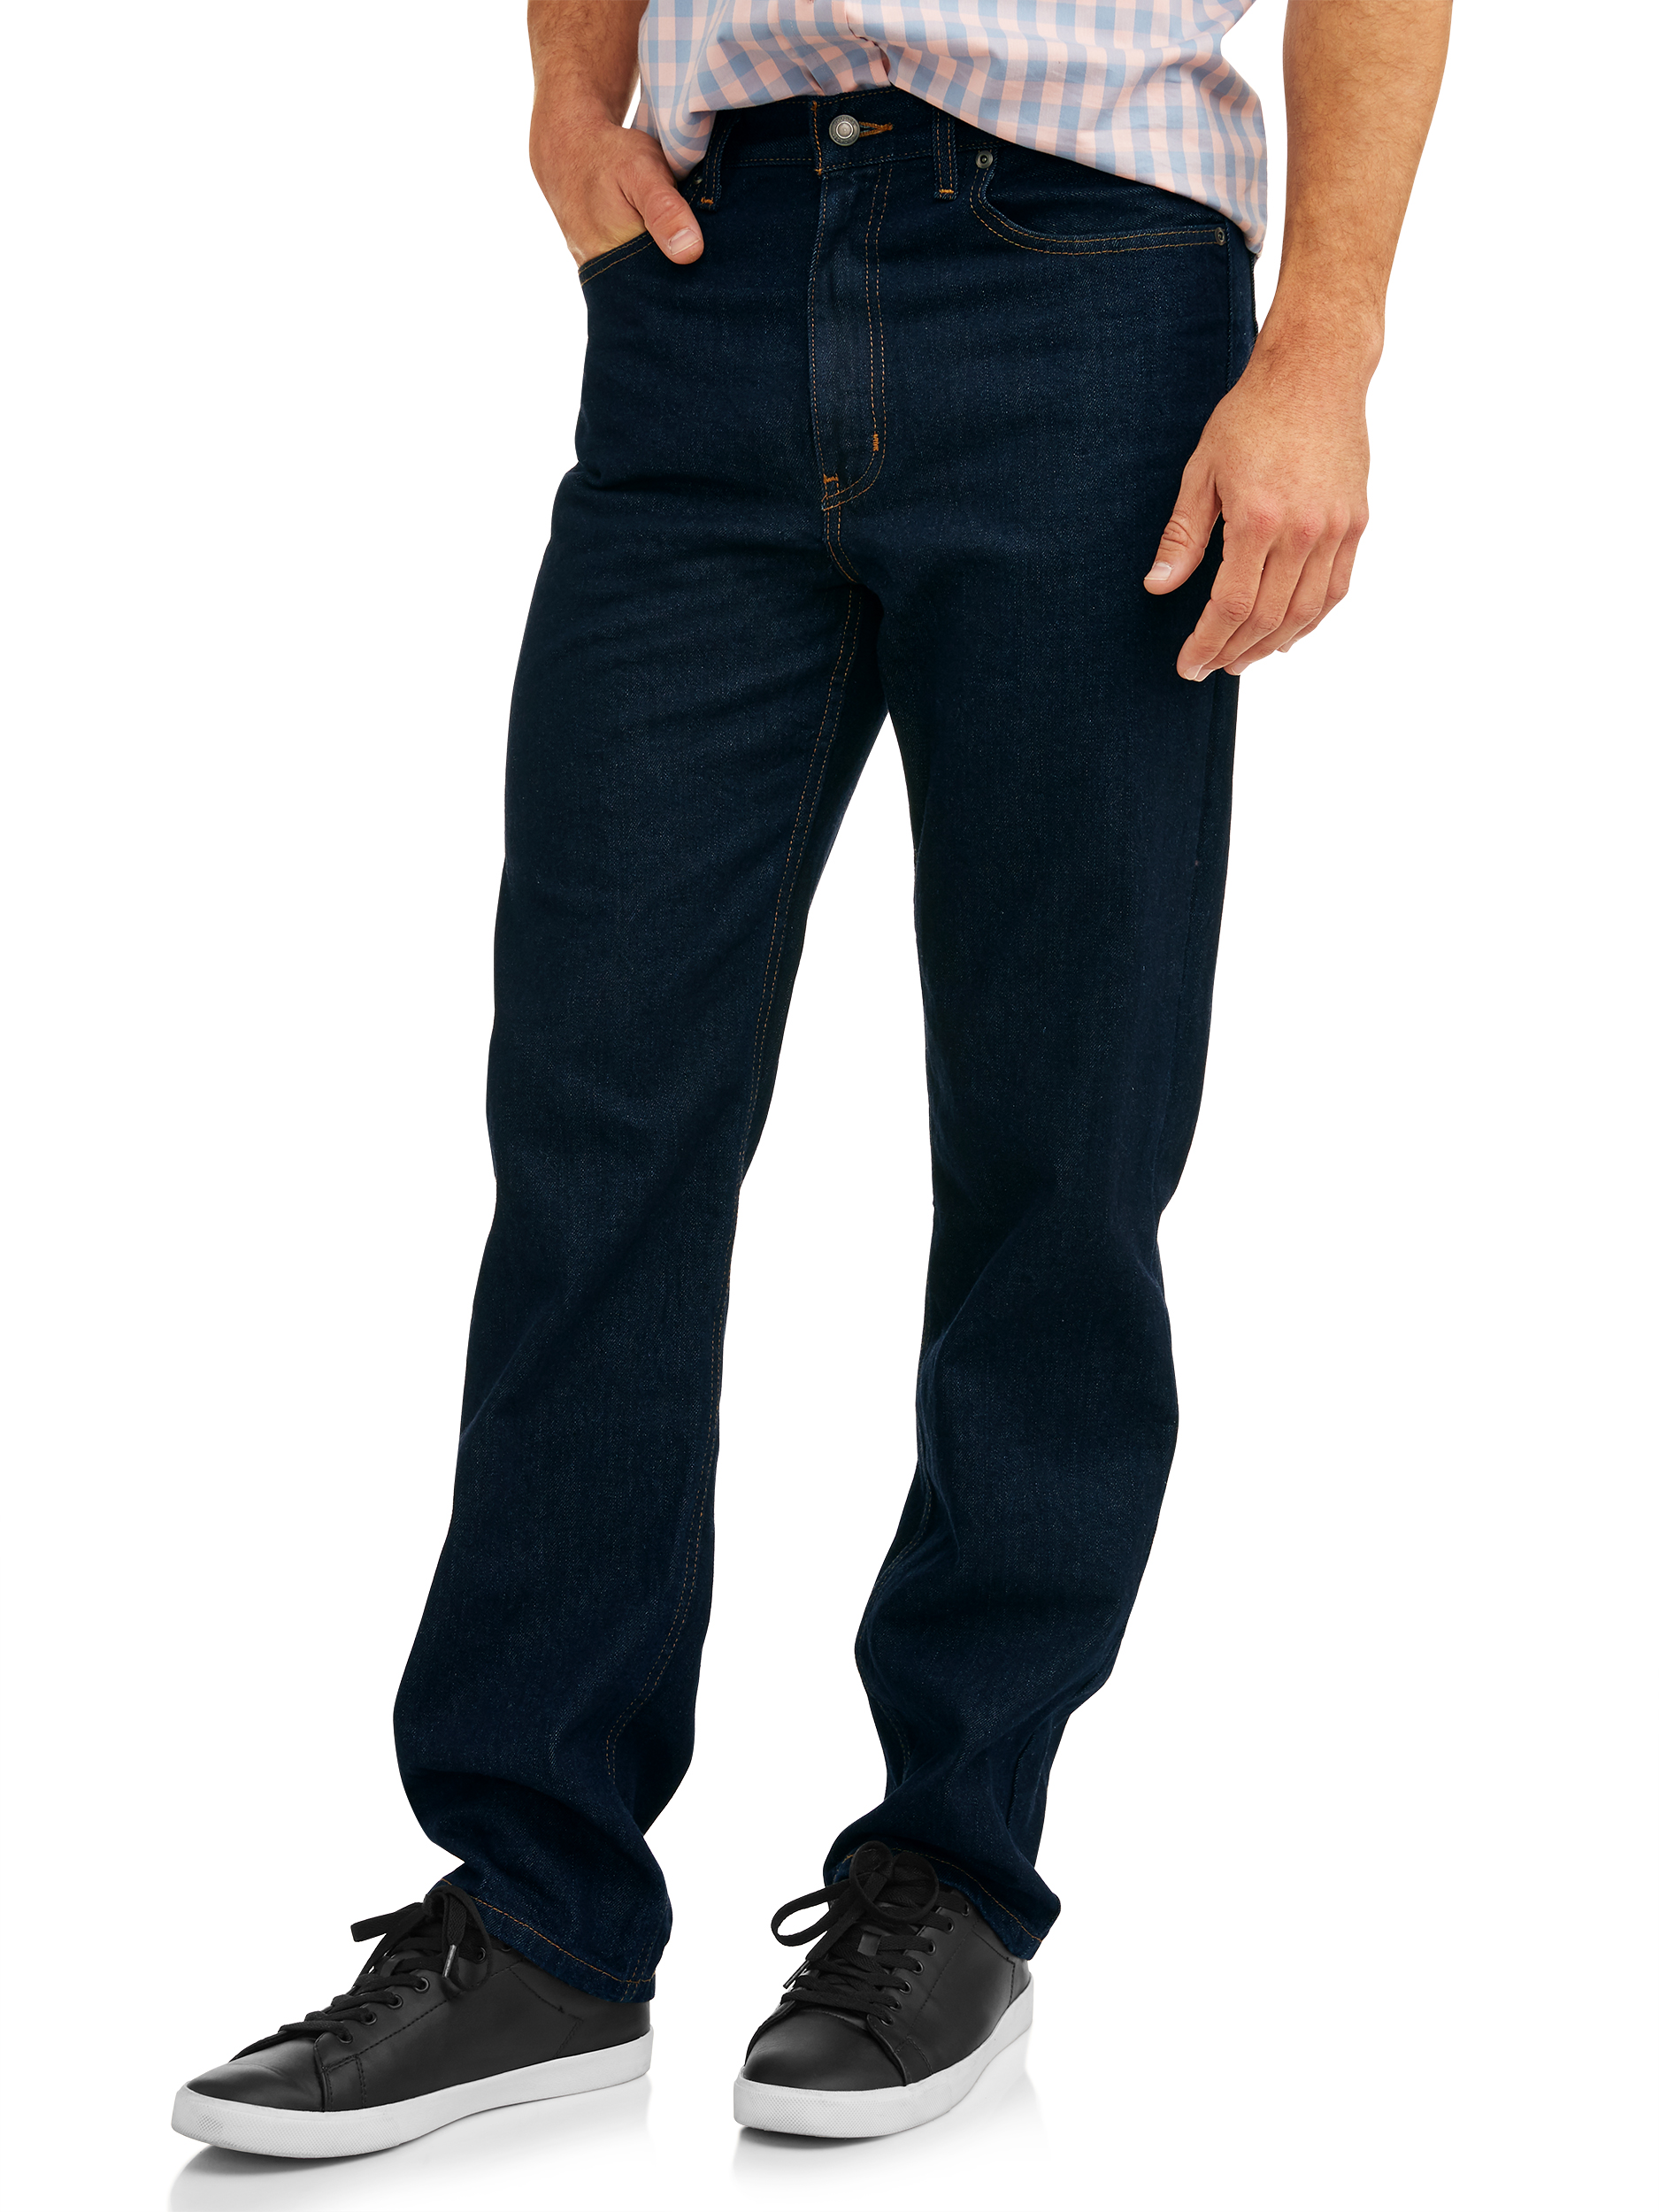 George Men's and Big Men's 100% Cotton Relaxed Fit Jeans - image 4 of 6